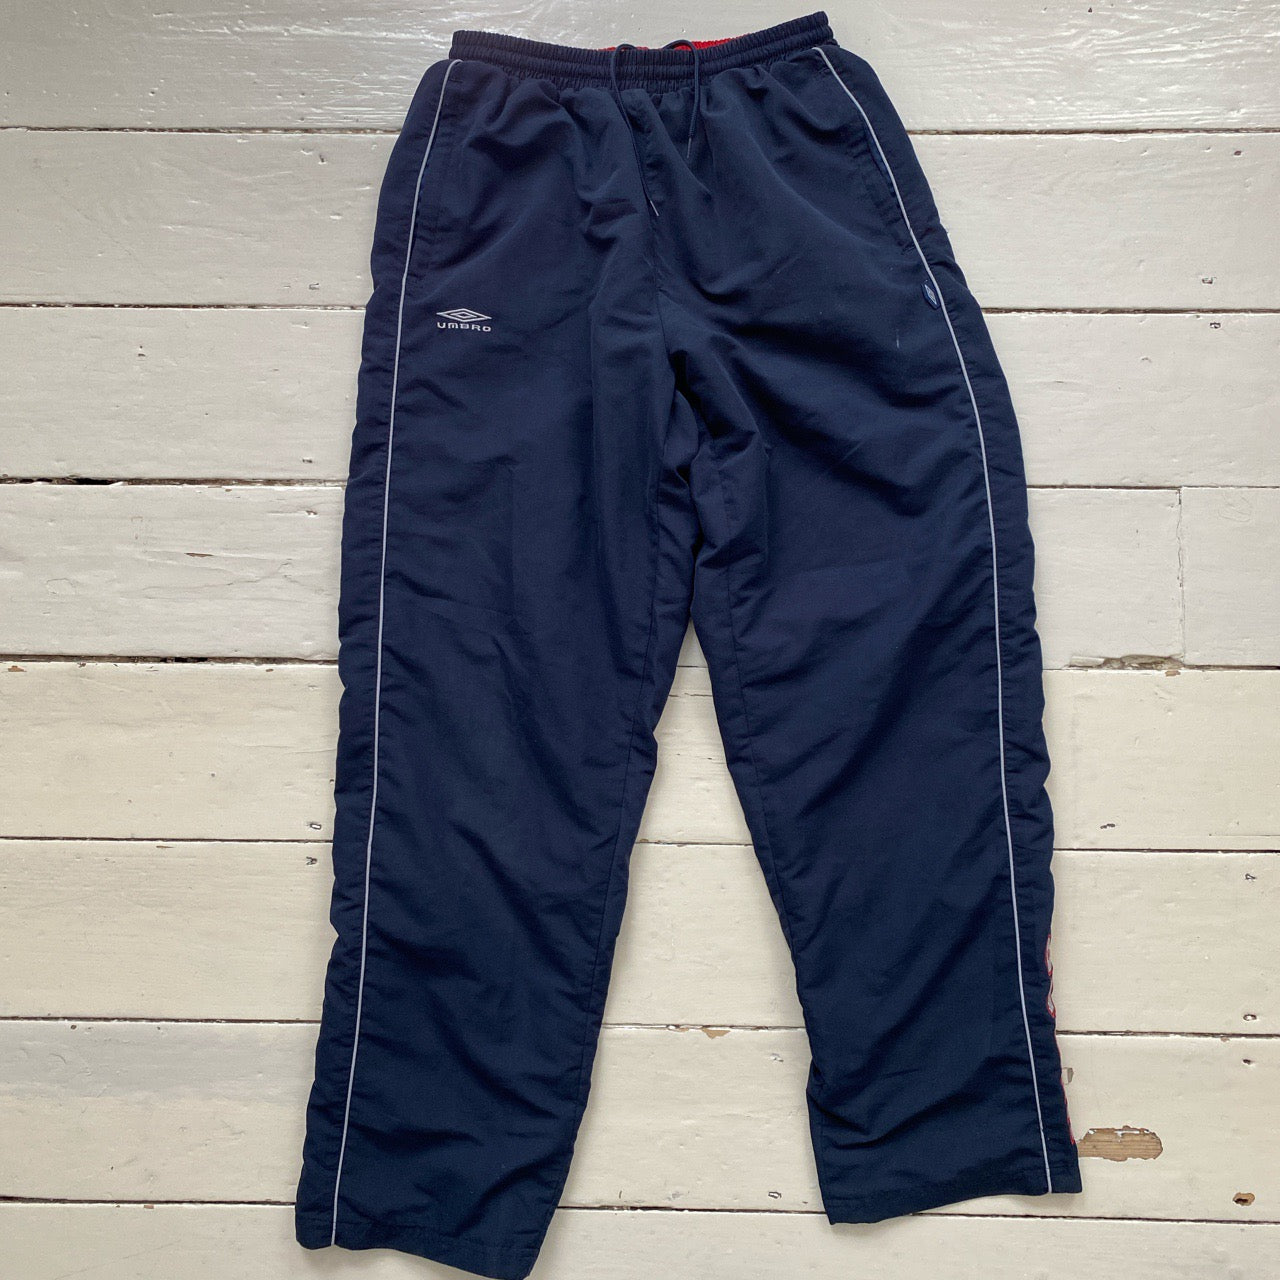 Umbro Spellout Shell Bottoms (Large)